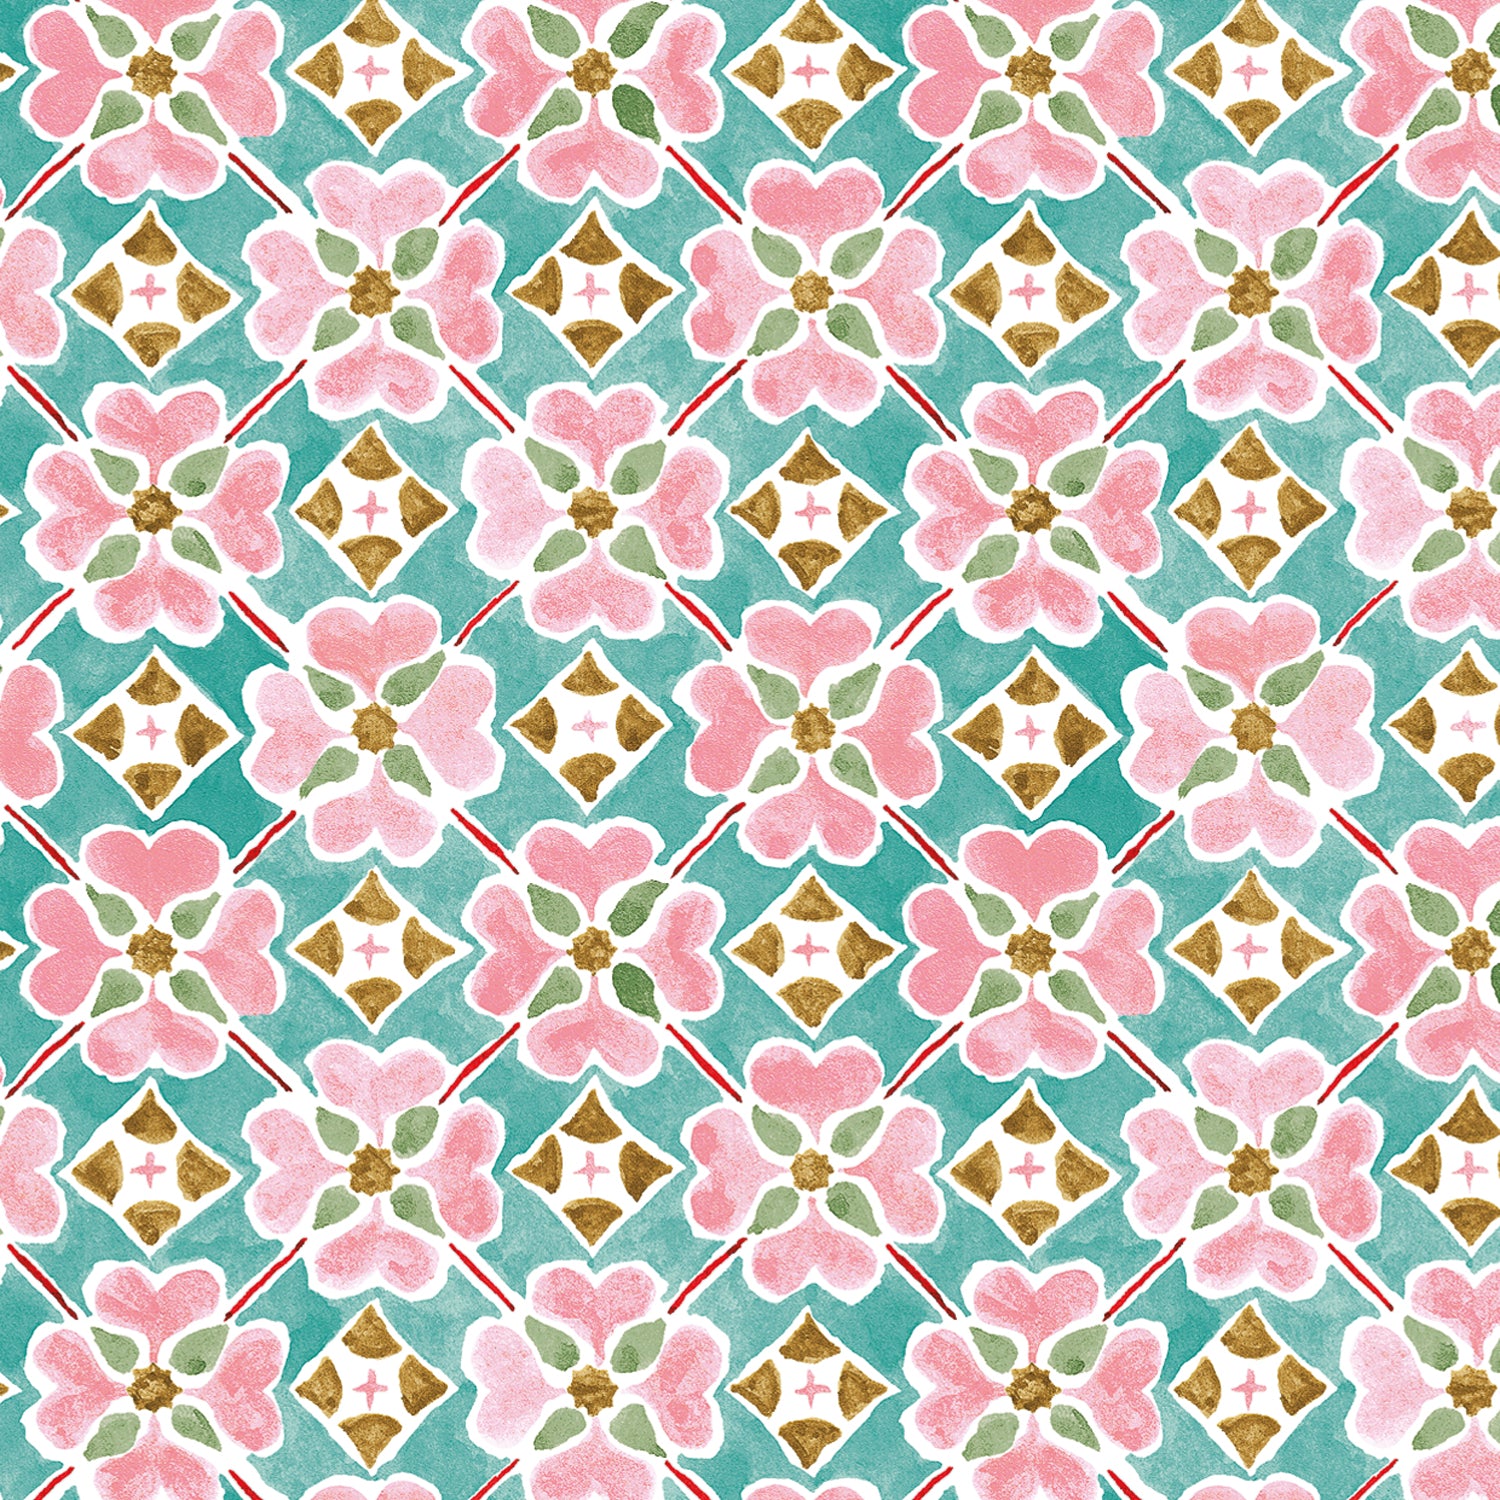 Detail of wallpaper in a floral lattice print in pink, brown, teal and white.